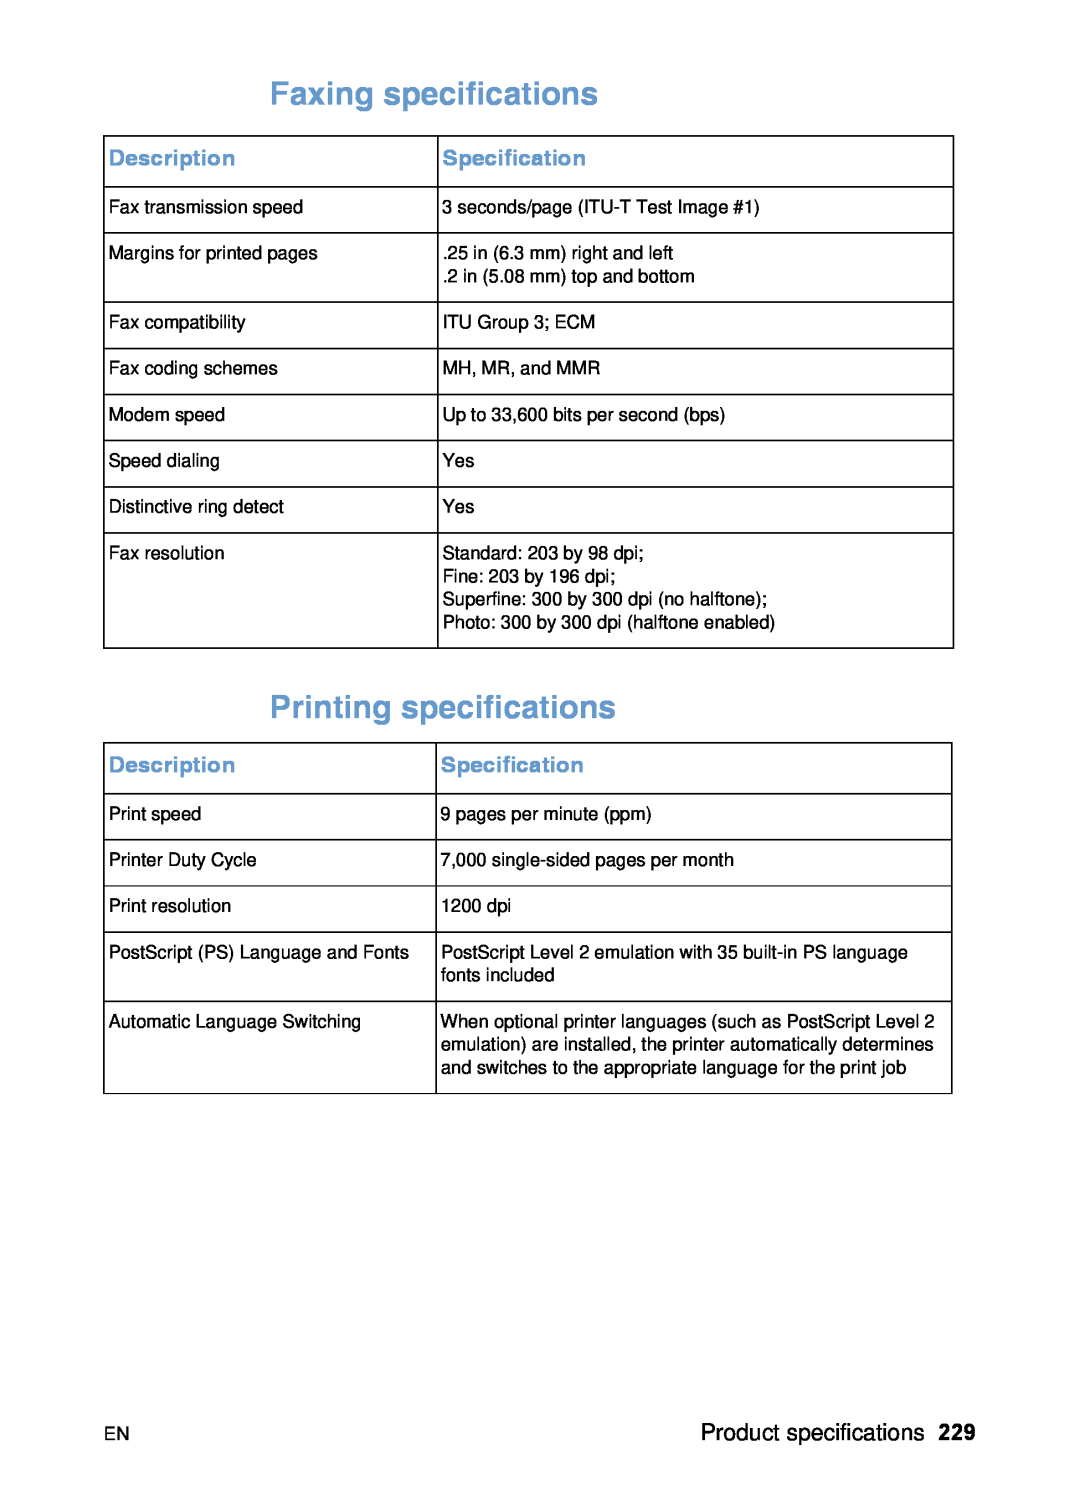 HP 3200 manual Faxing specifications, Printing specifications, Description, Specification 